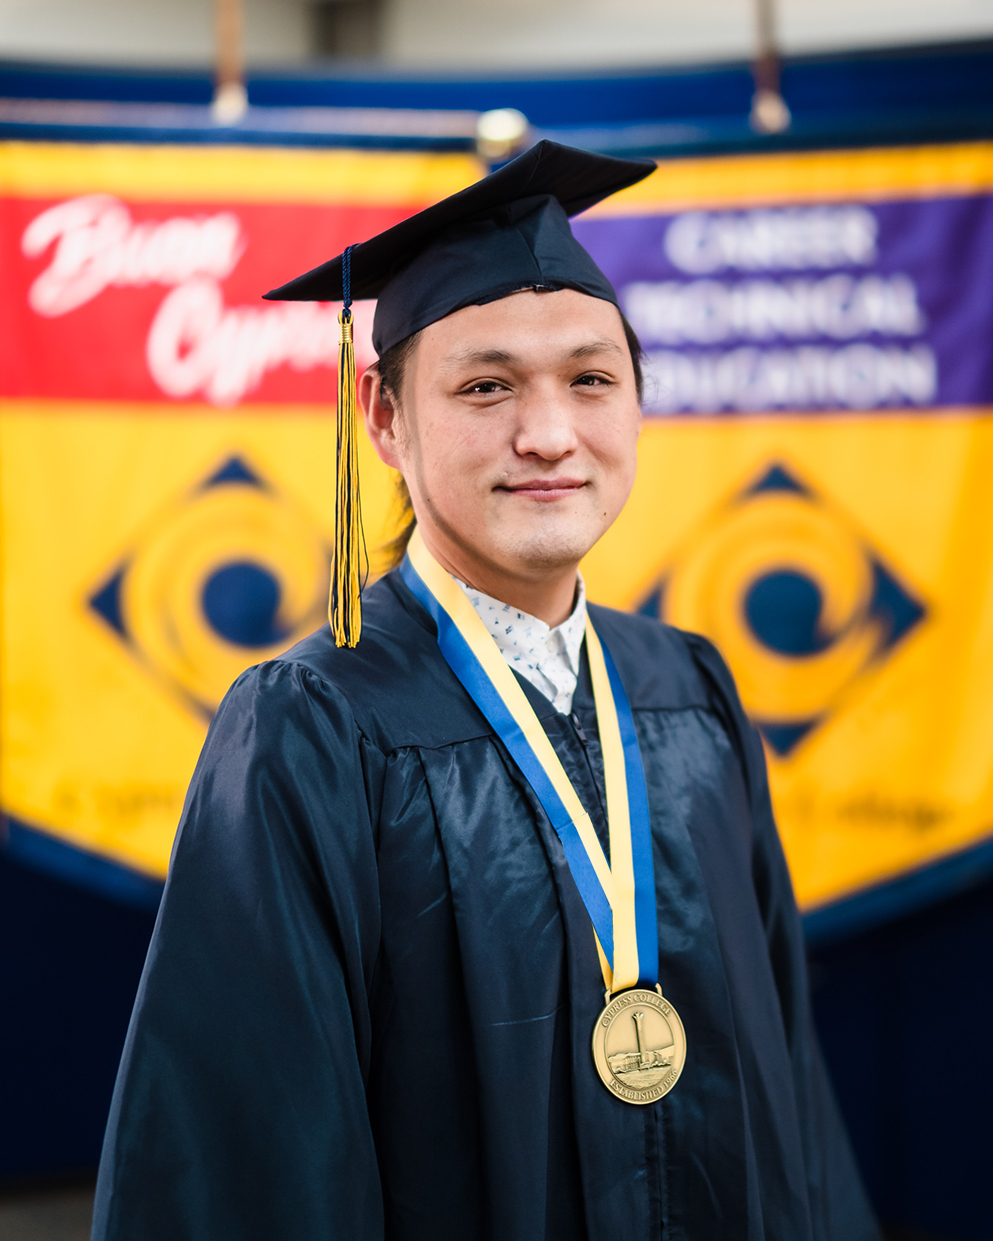 Culinary Arts student Dan Kim poses in graduation regalia in front of gonfalons for Cypress College and Career Technical Education